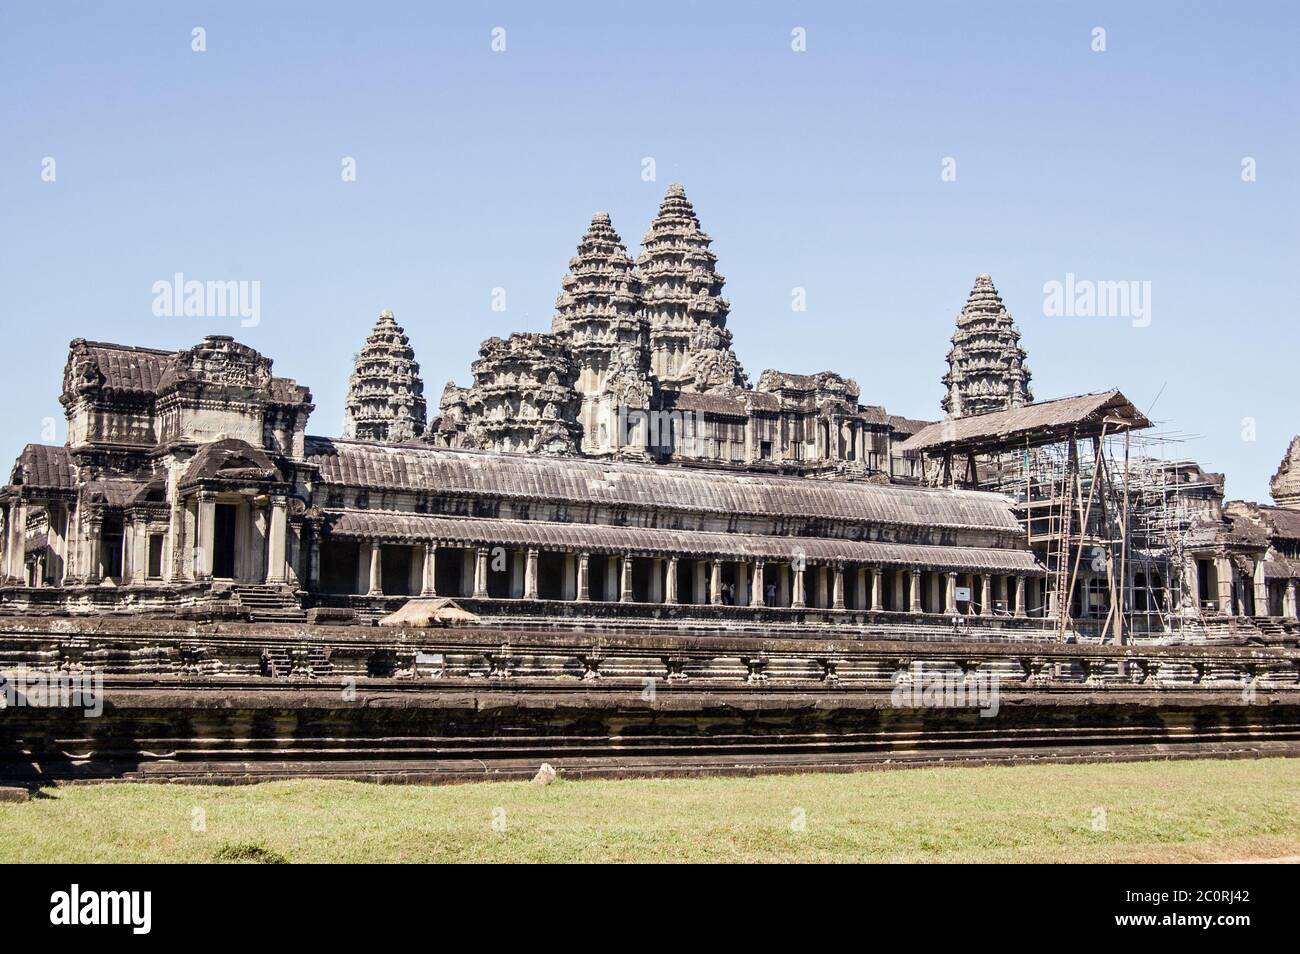 View of the world famous temple of Angkor Wat in Siem Reap, Cambodia. Stock Photo